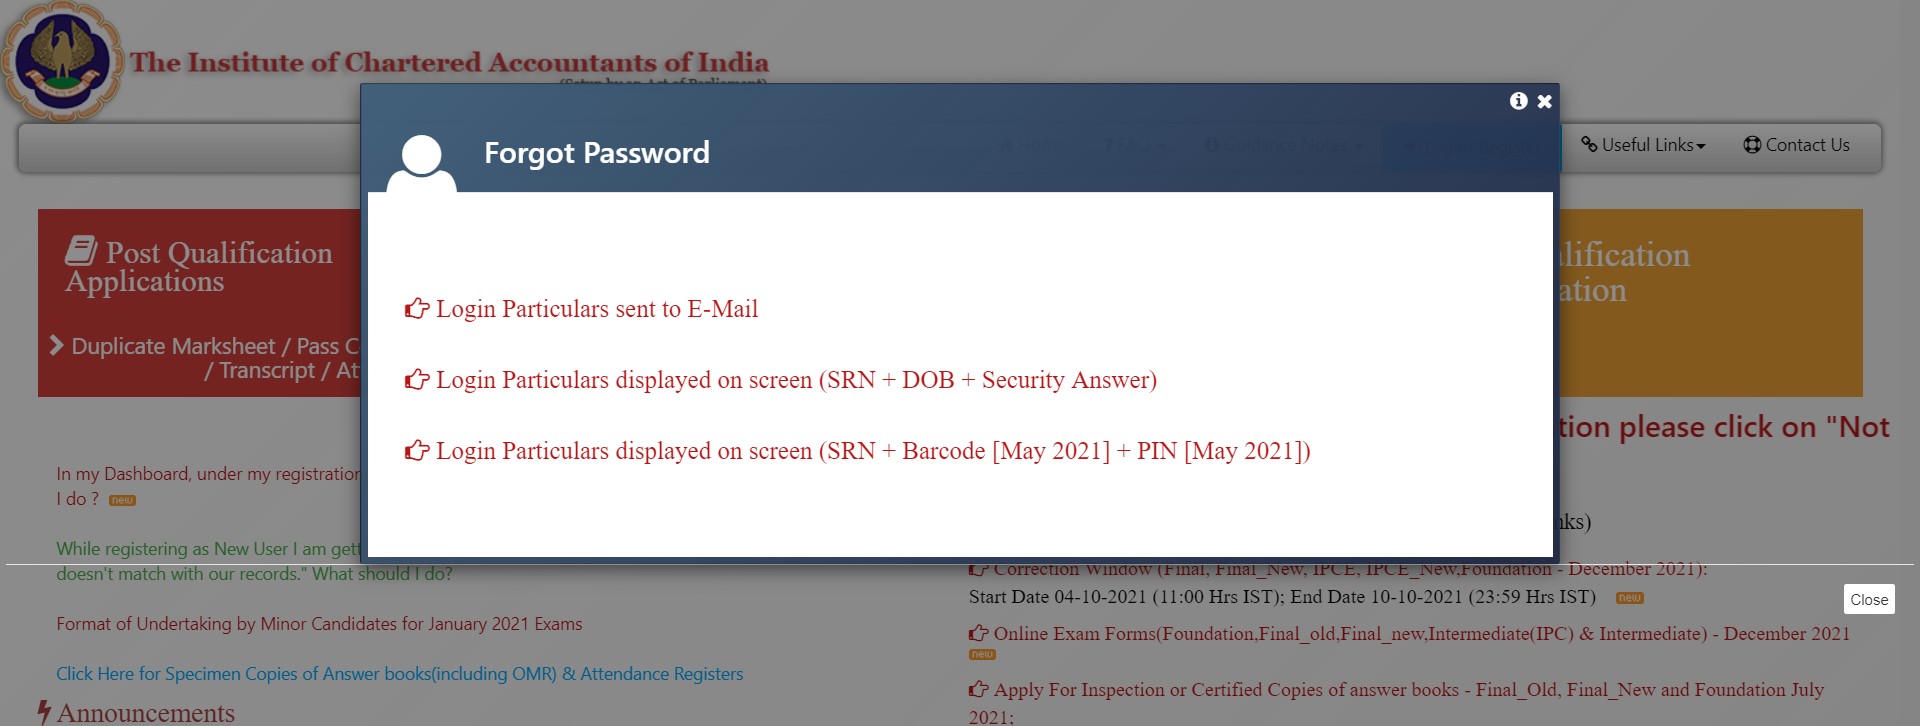 How to recover password to download the admit card